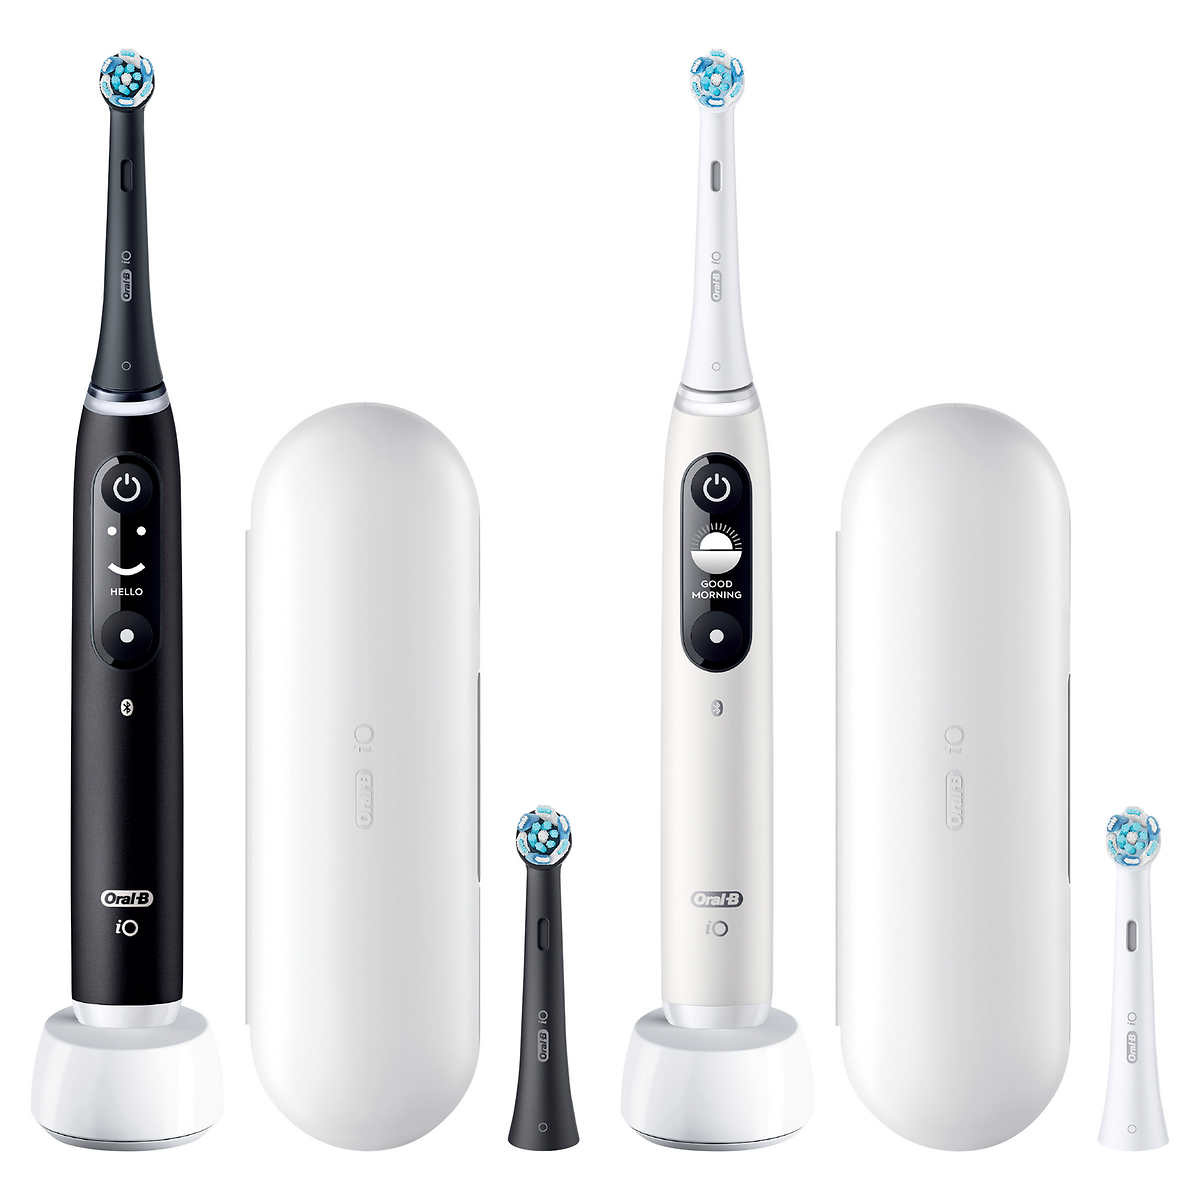 Oral-B iO Ultimate Clean Rechargeable Toothbrush 2-pack with Travel Cases